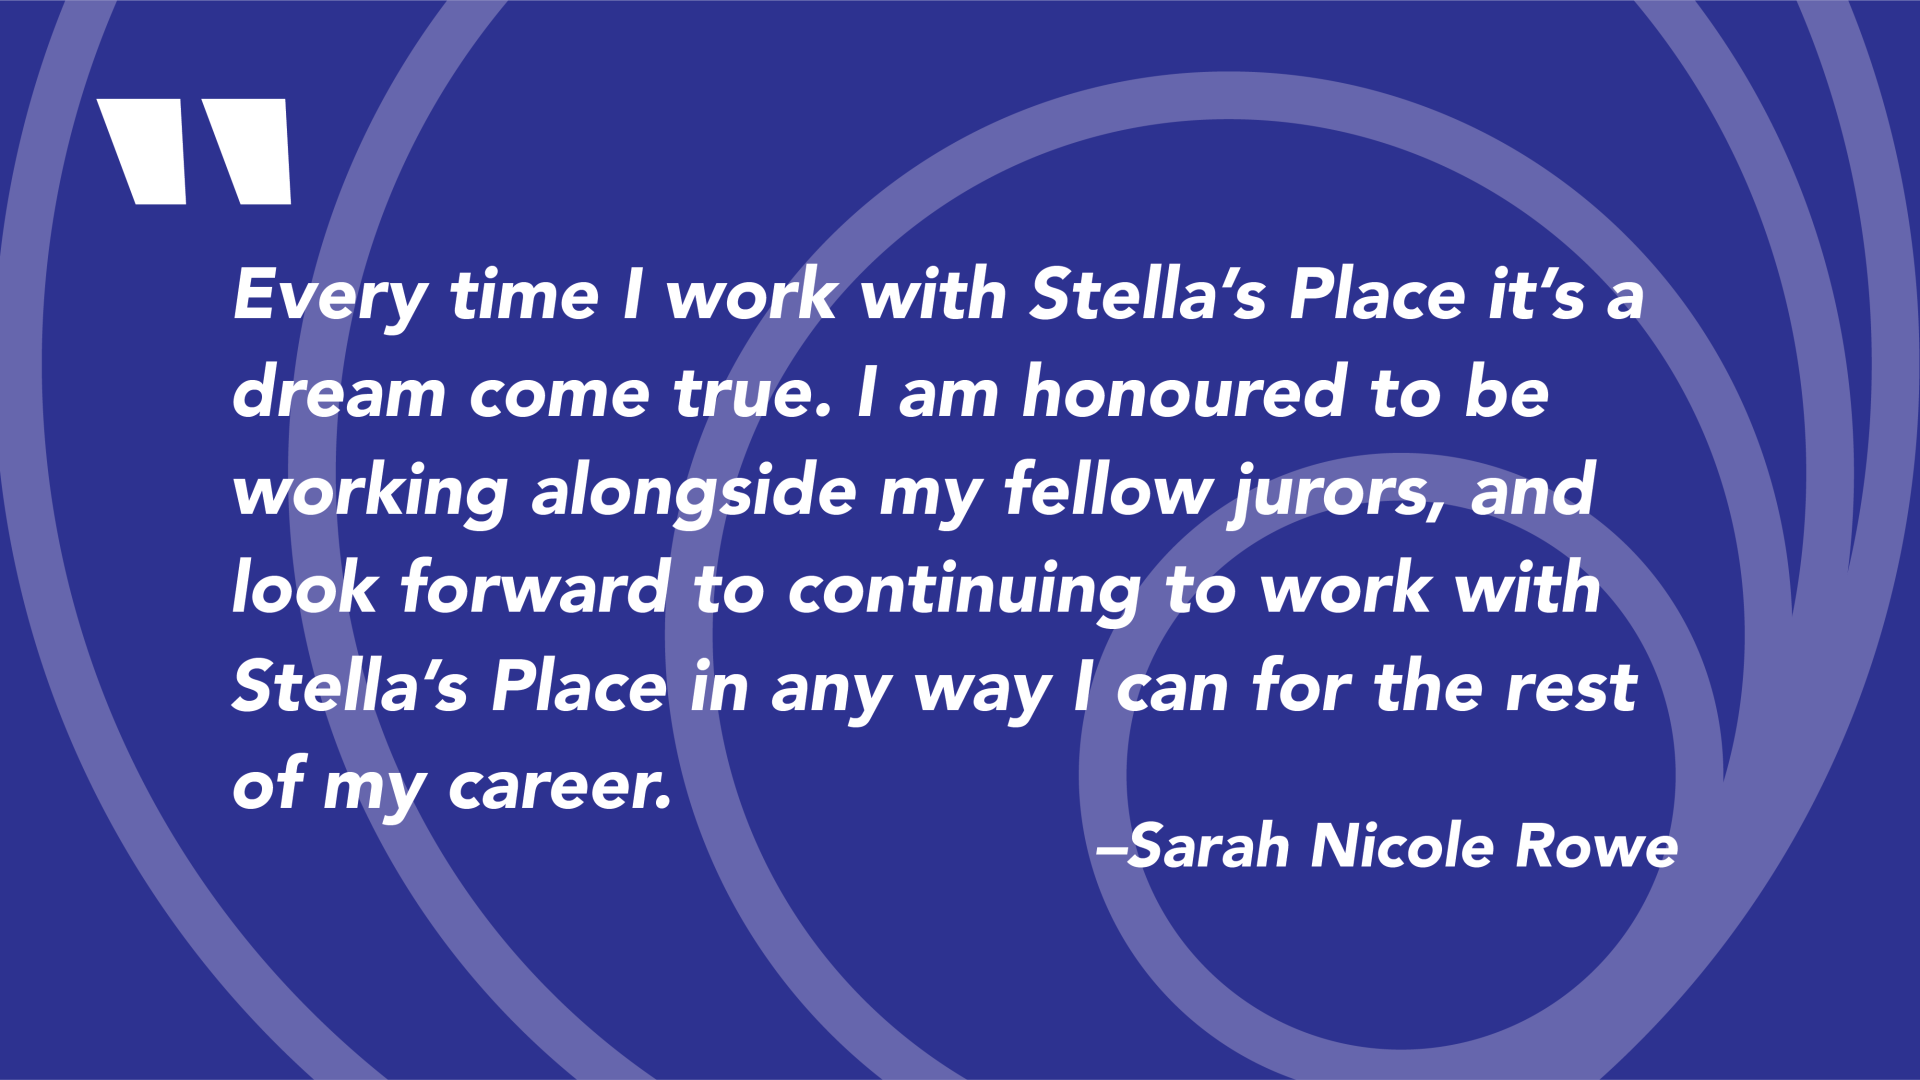 A dark purple graphic with a quote that says "Every time I work with Stella’s Place it’s a dream come true. I am honoured to be working alongside my fellow jurors, and look forward to continuing to work with Stella’s Place in any way I can for the rest of my career." Quote by Sarah Nicole Rowe